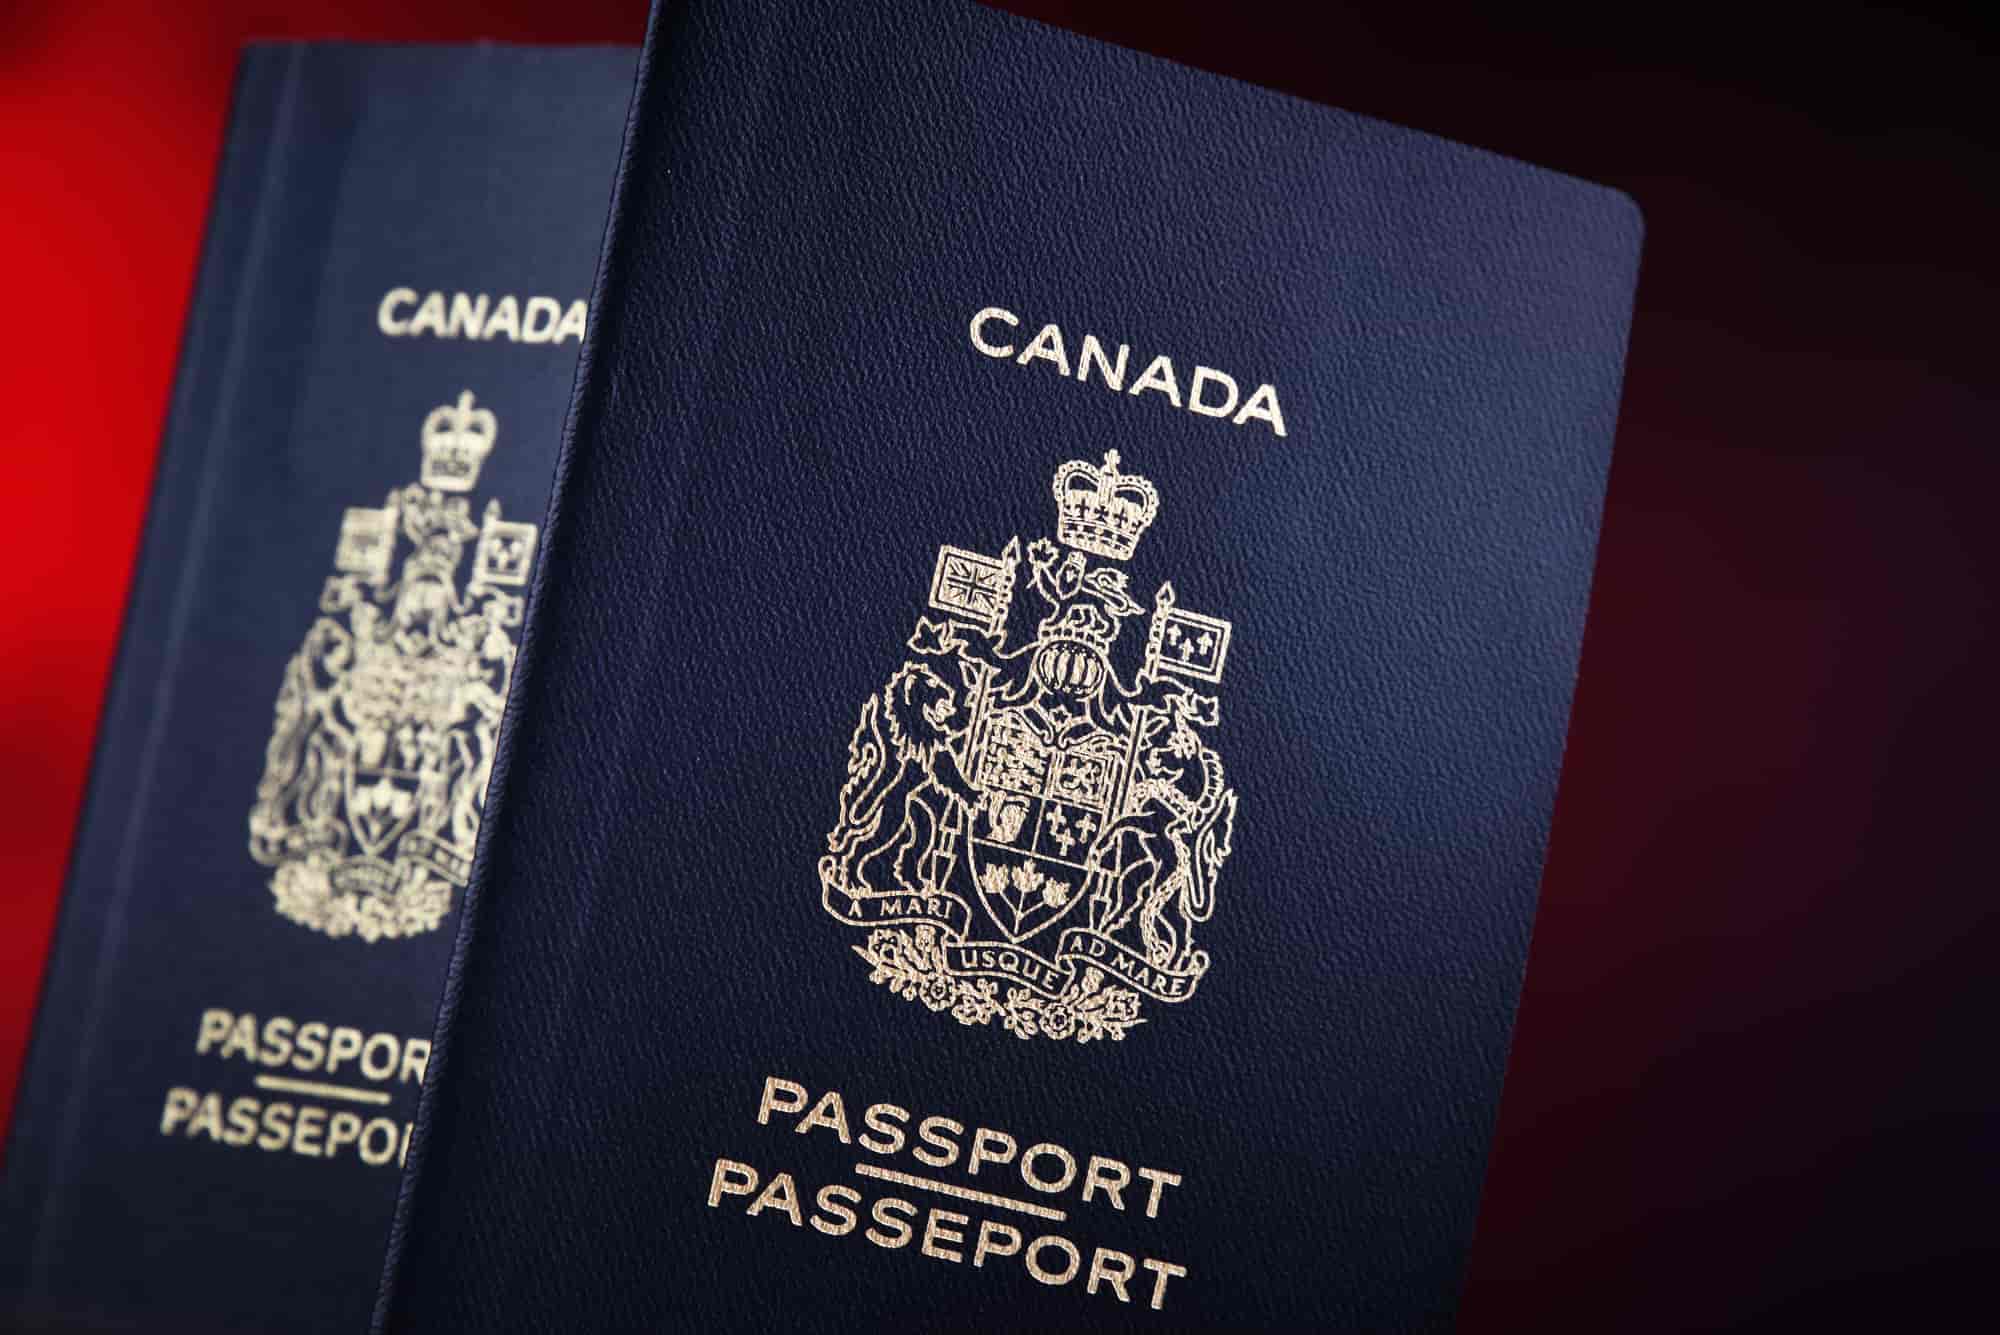 What to expect from Canada Immigration in 2021